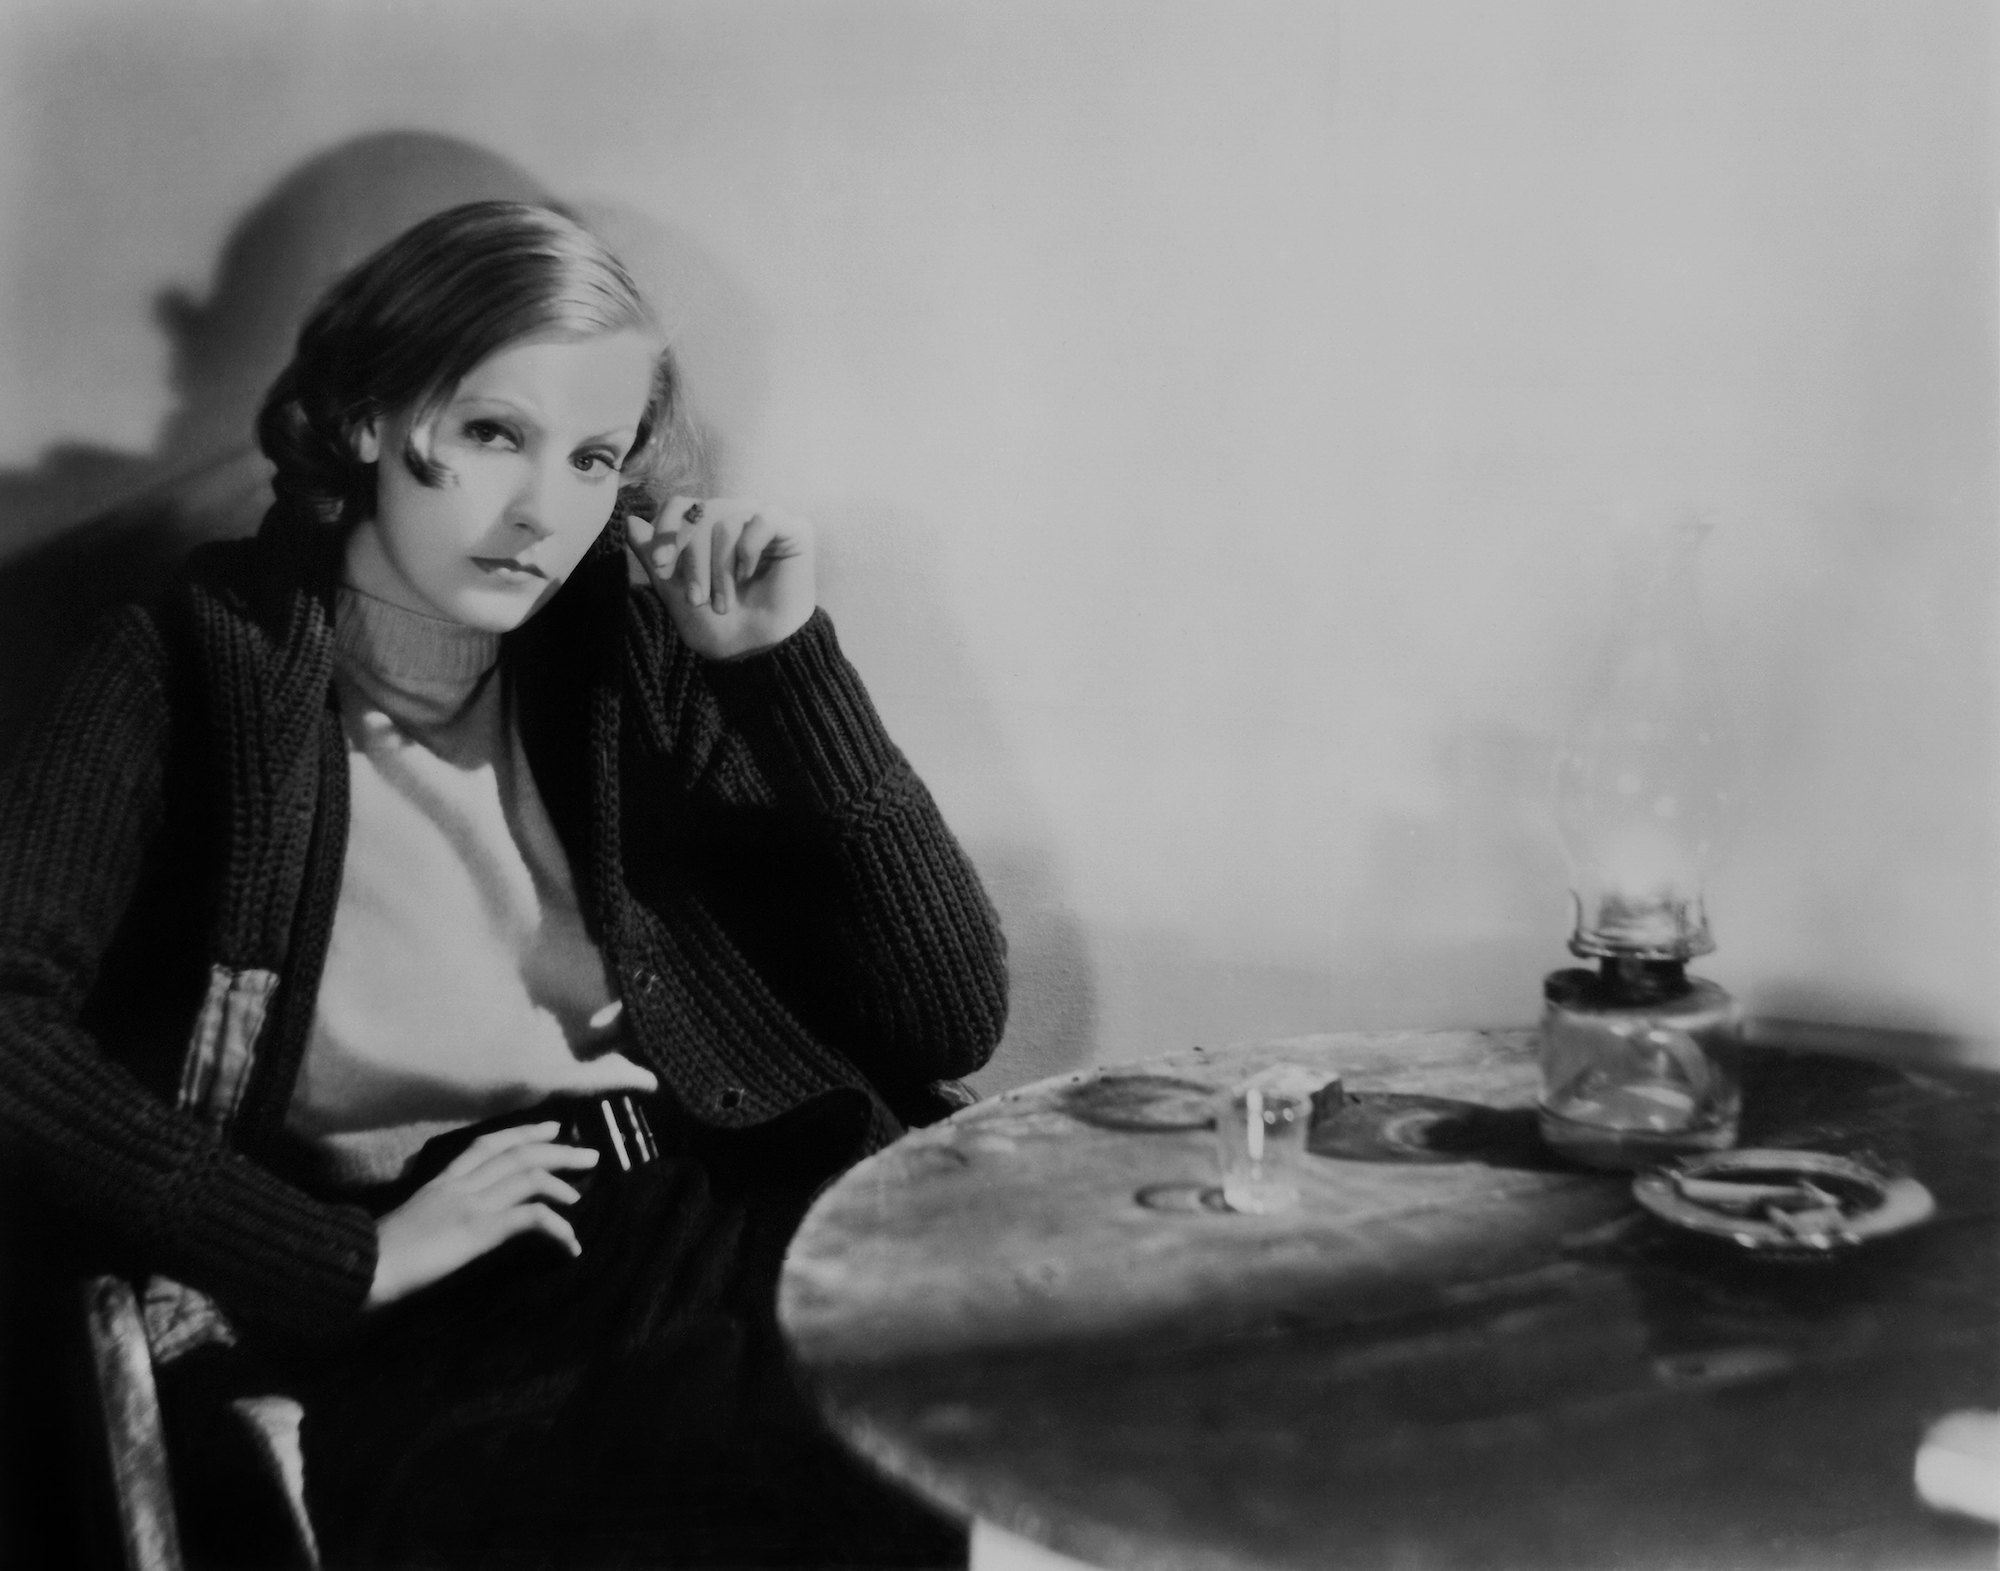 Greta Garbo on set of 'Anna Christie' looking off camera, sitting at a table